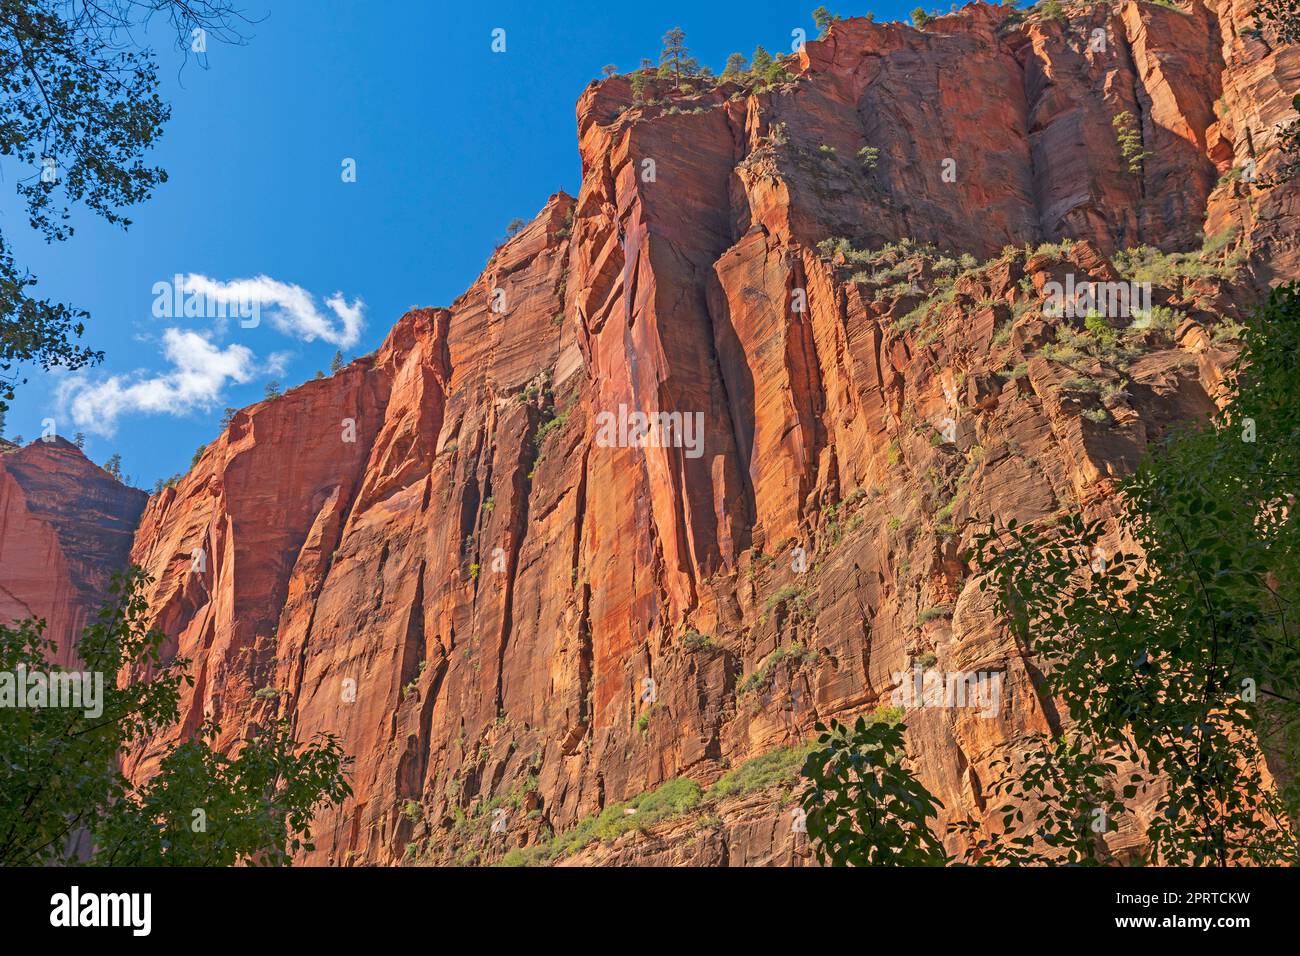 Looming Cliffs in a Deep Canyon Stock Photo